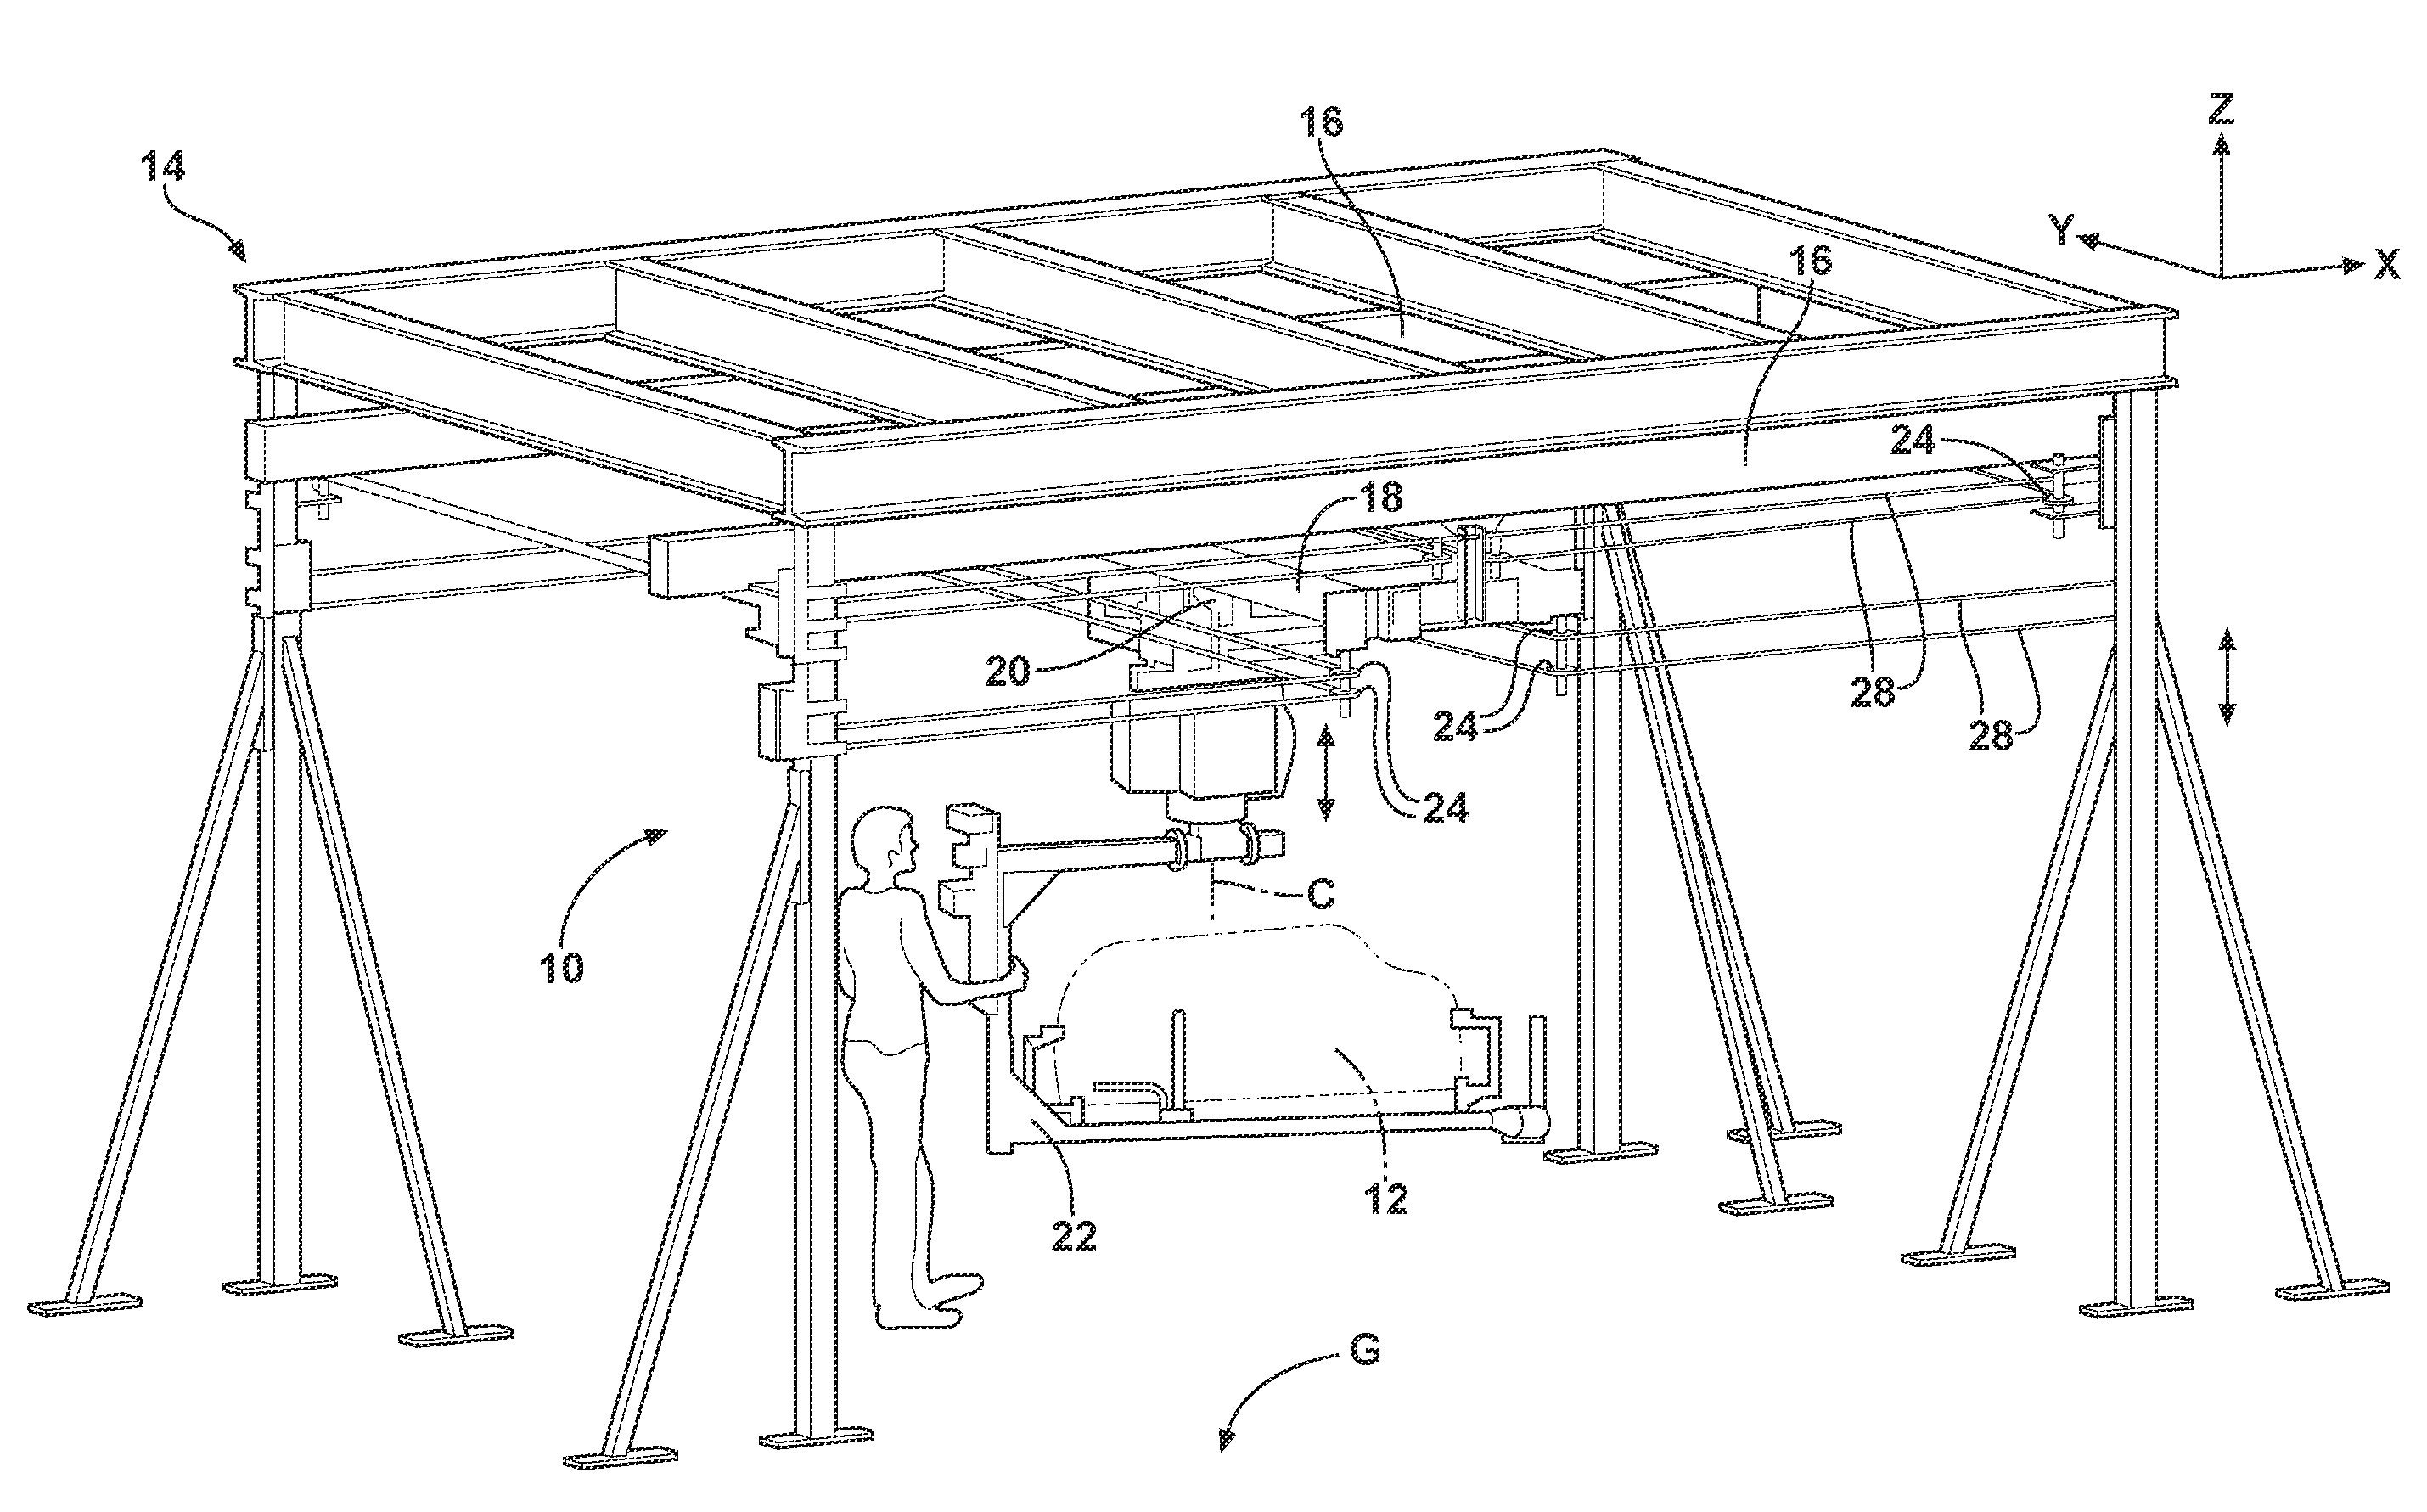 Actuation system configured for moving a payload